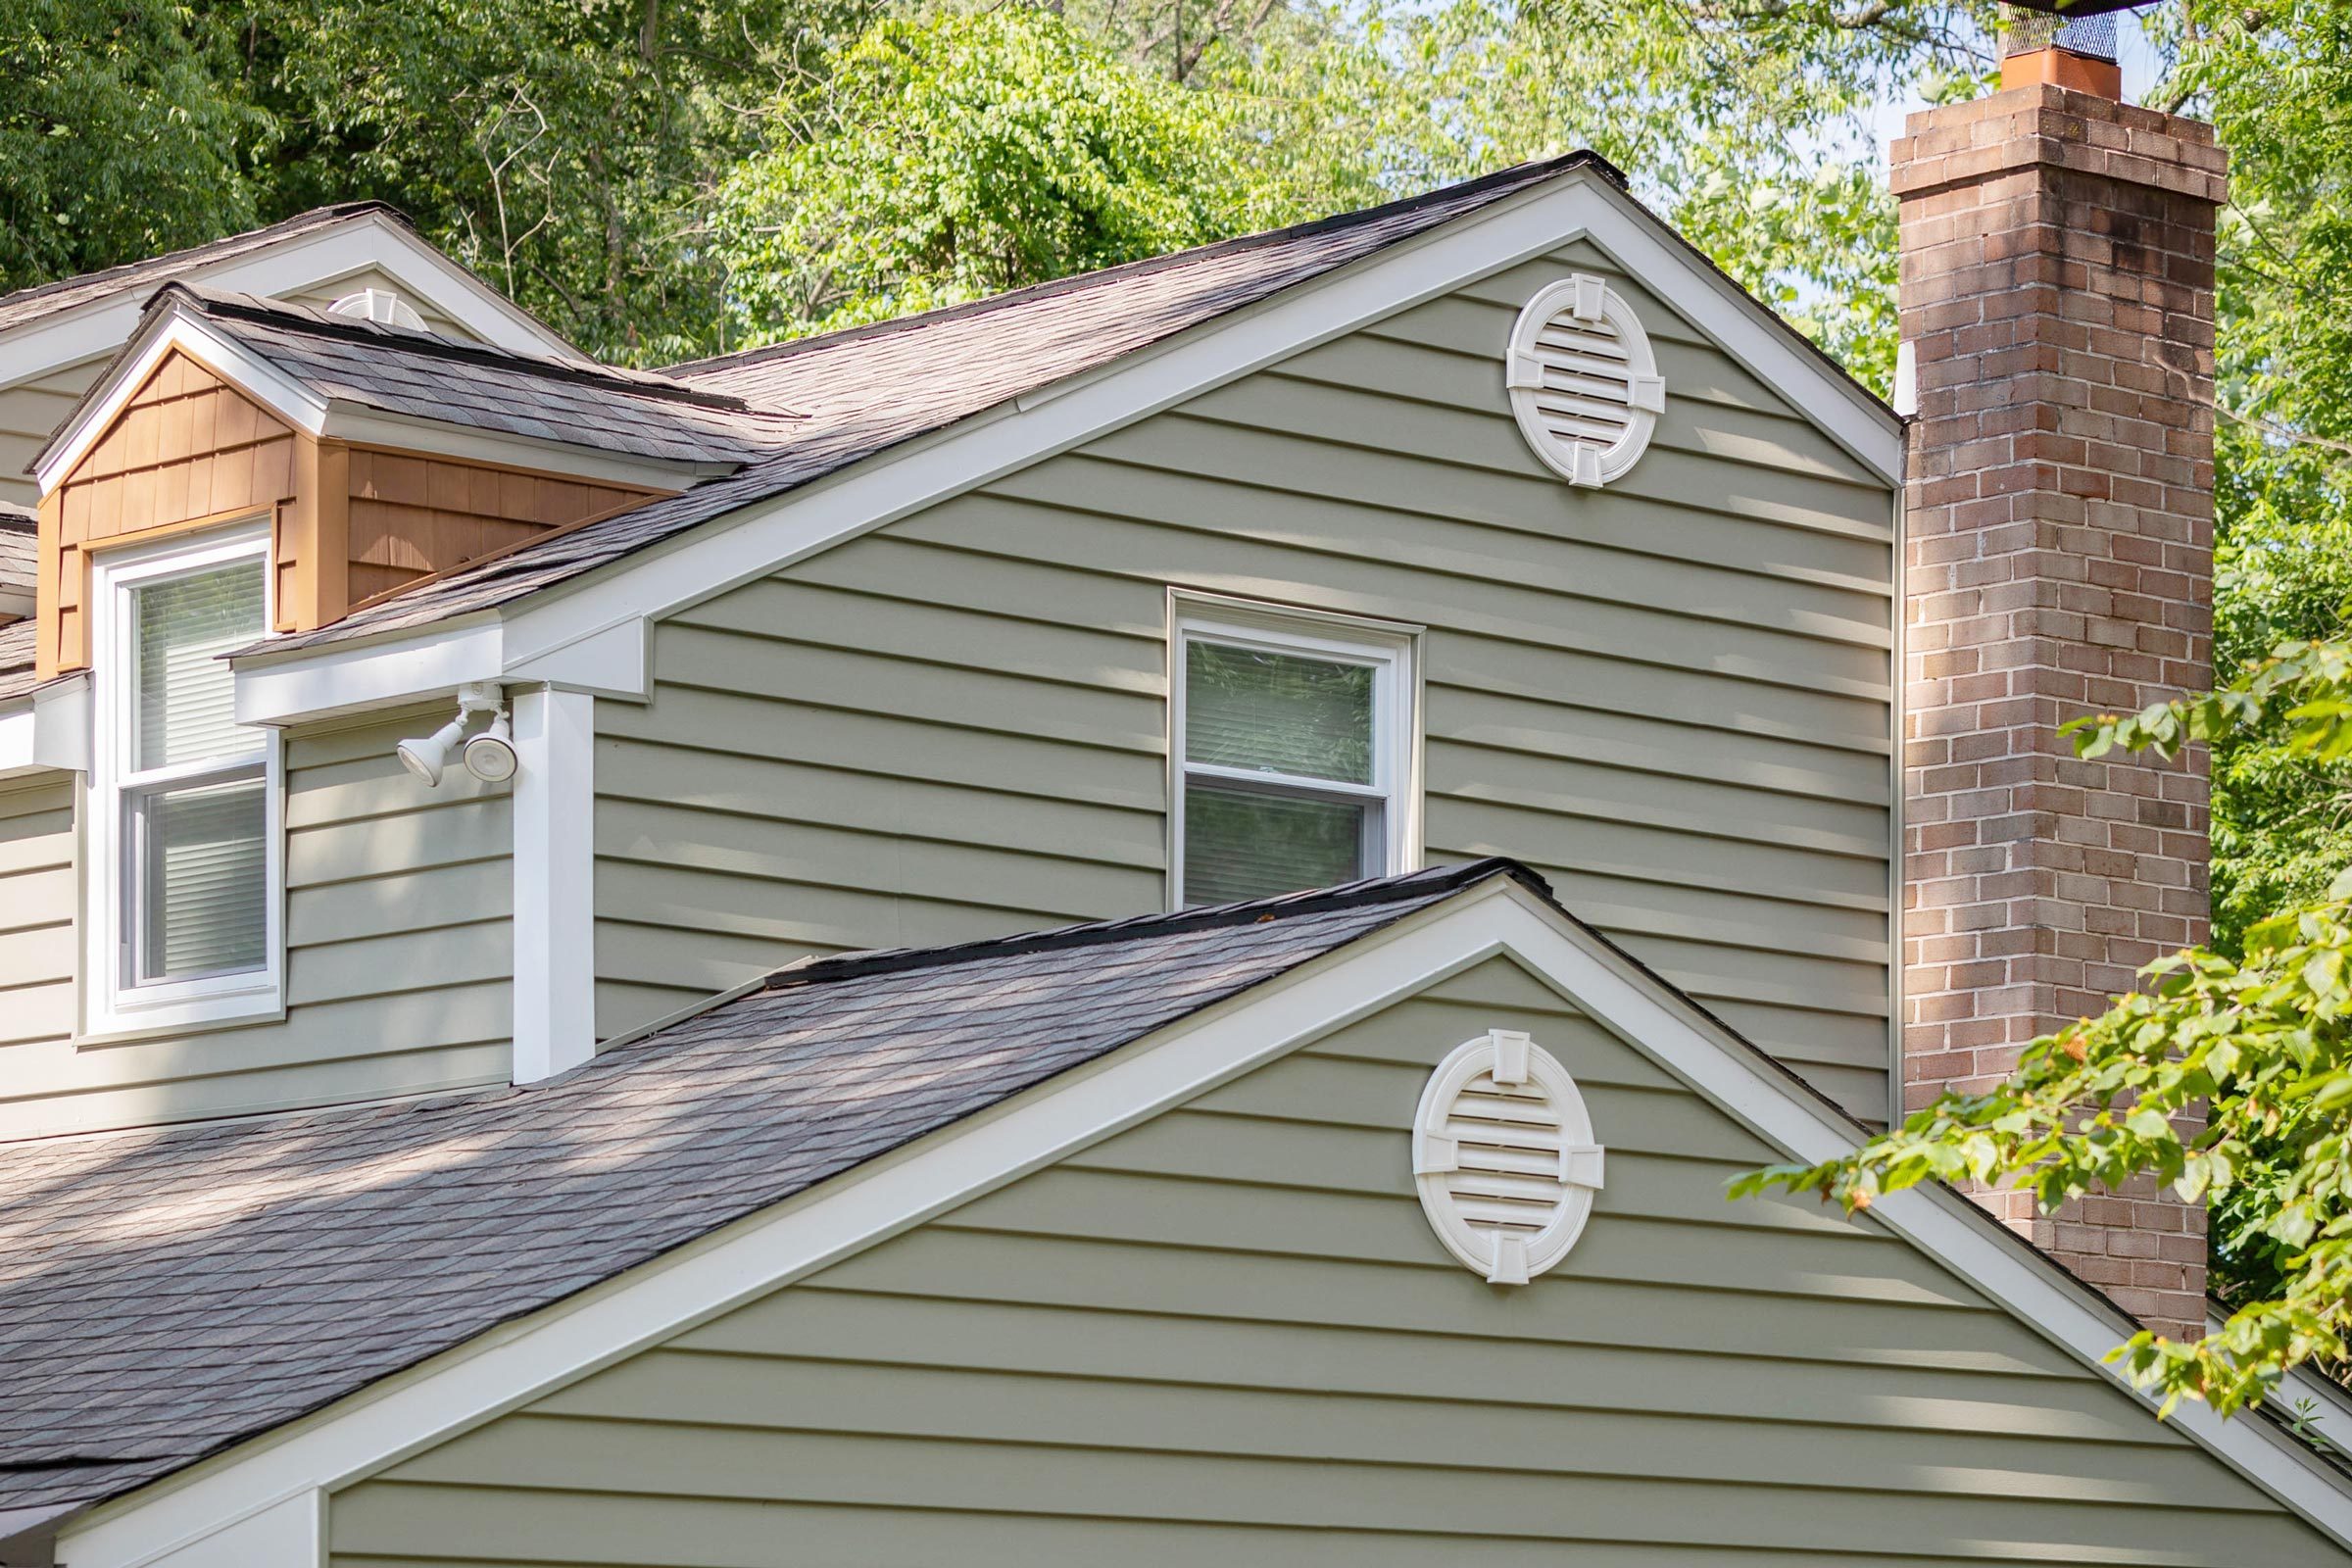 8 Vinyl Siding Colors That'll Never Go Out of Style